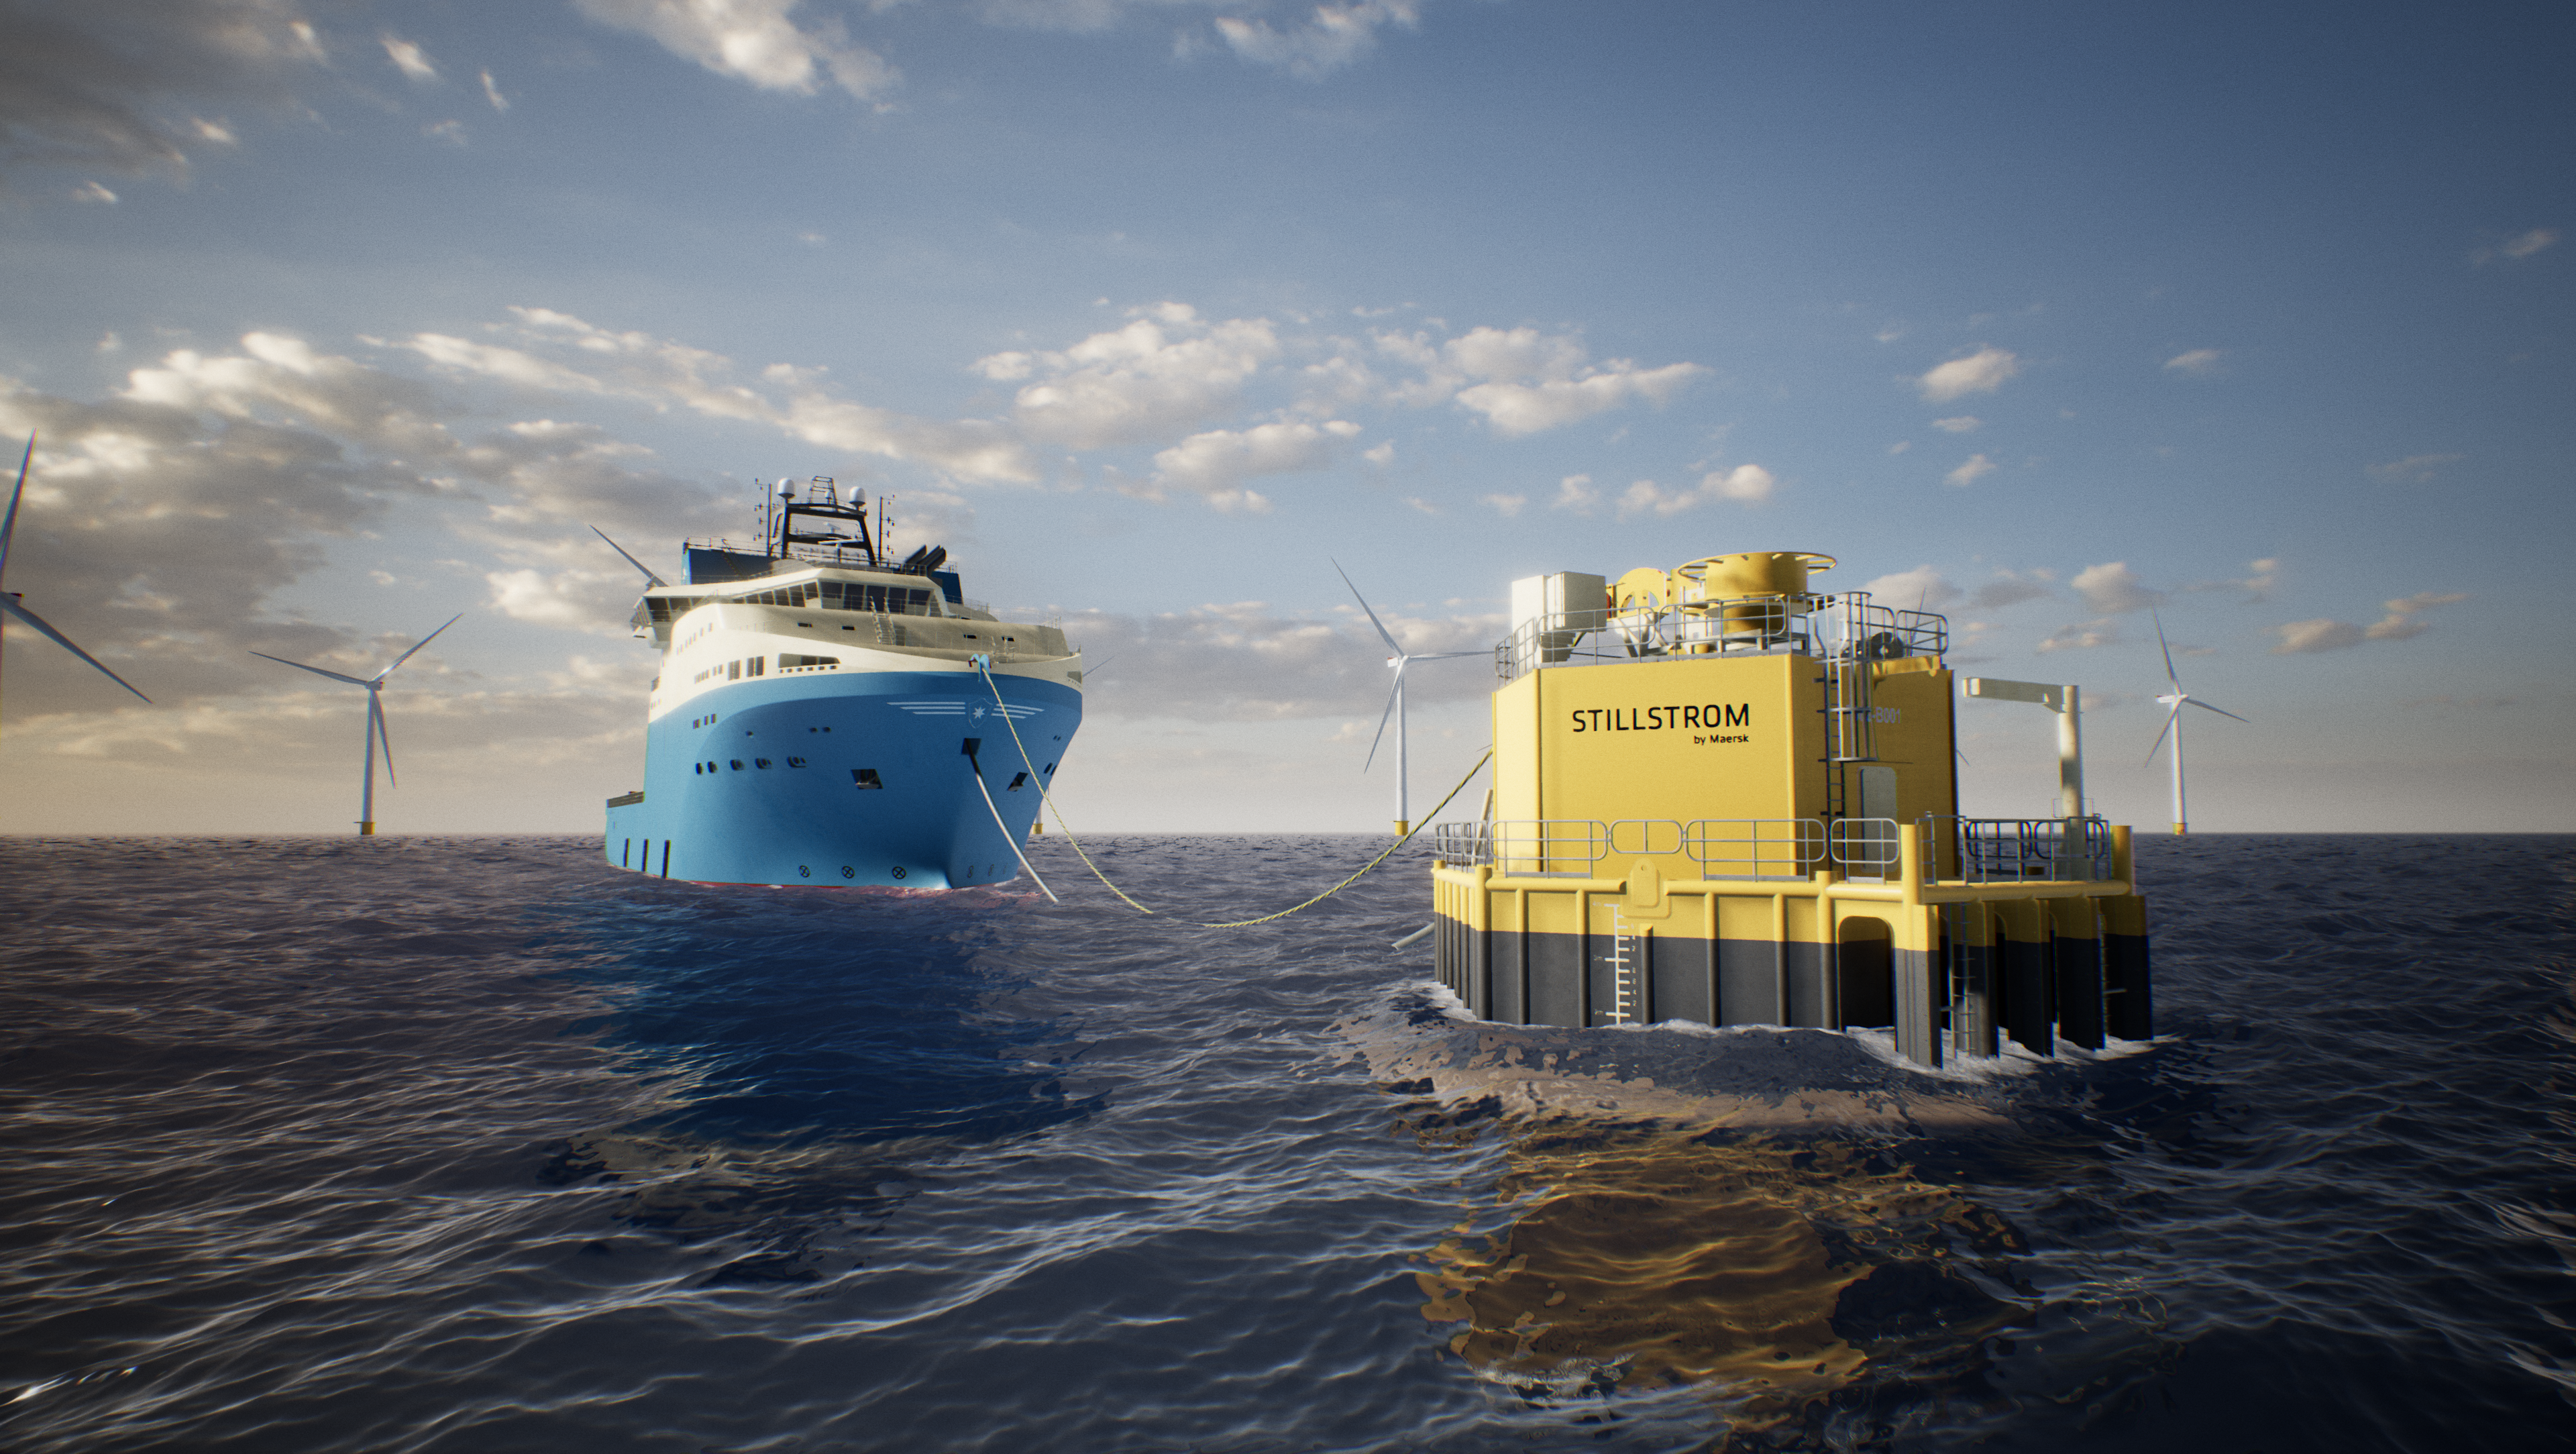 Stillstrom and Ørsted have joined forces for offshore charging